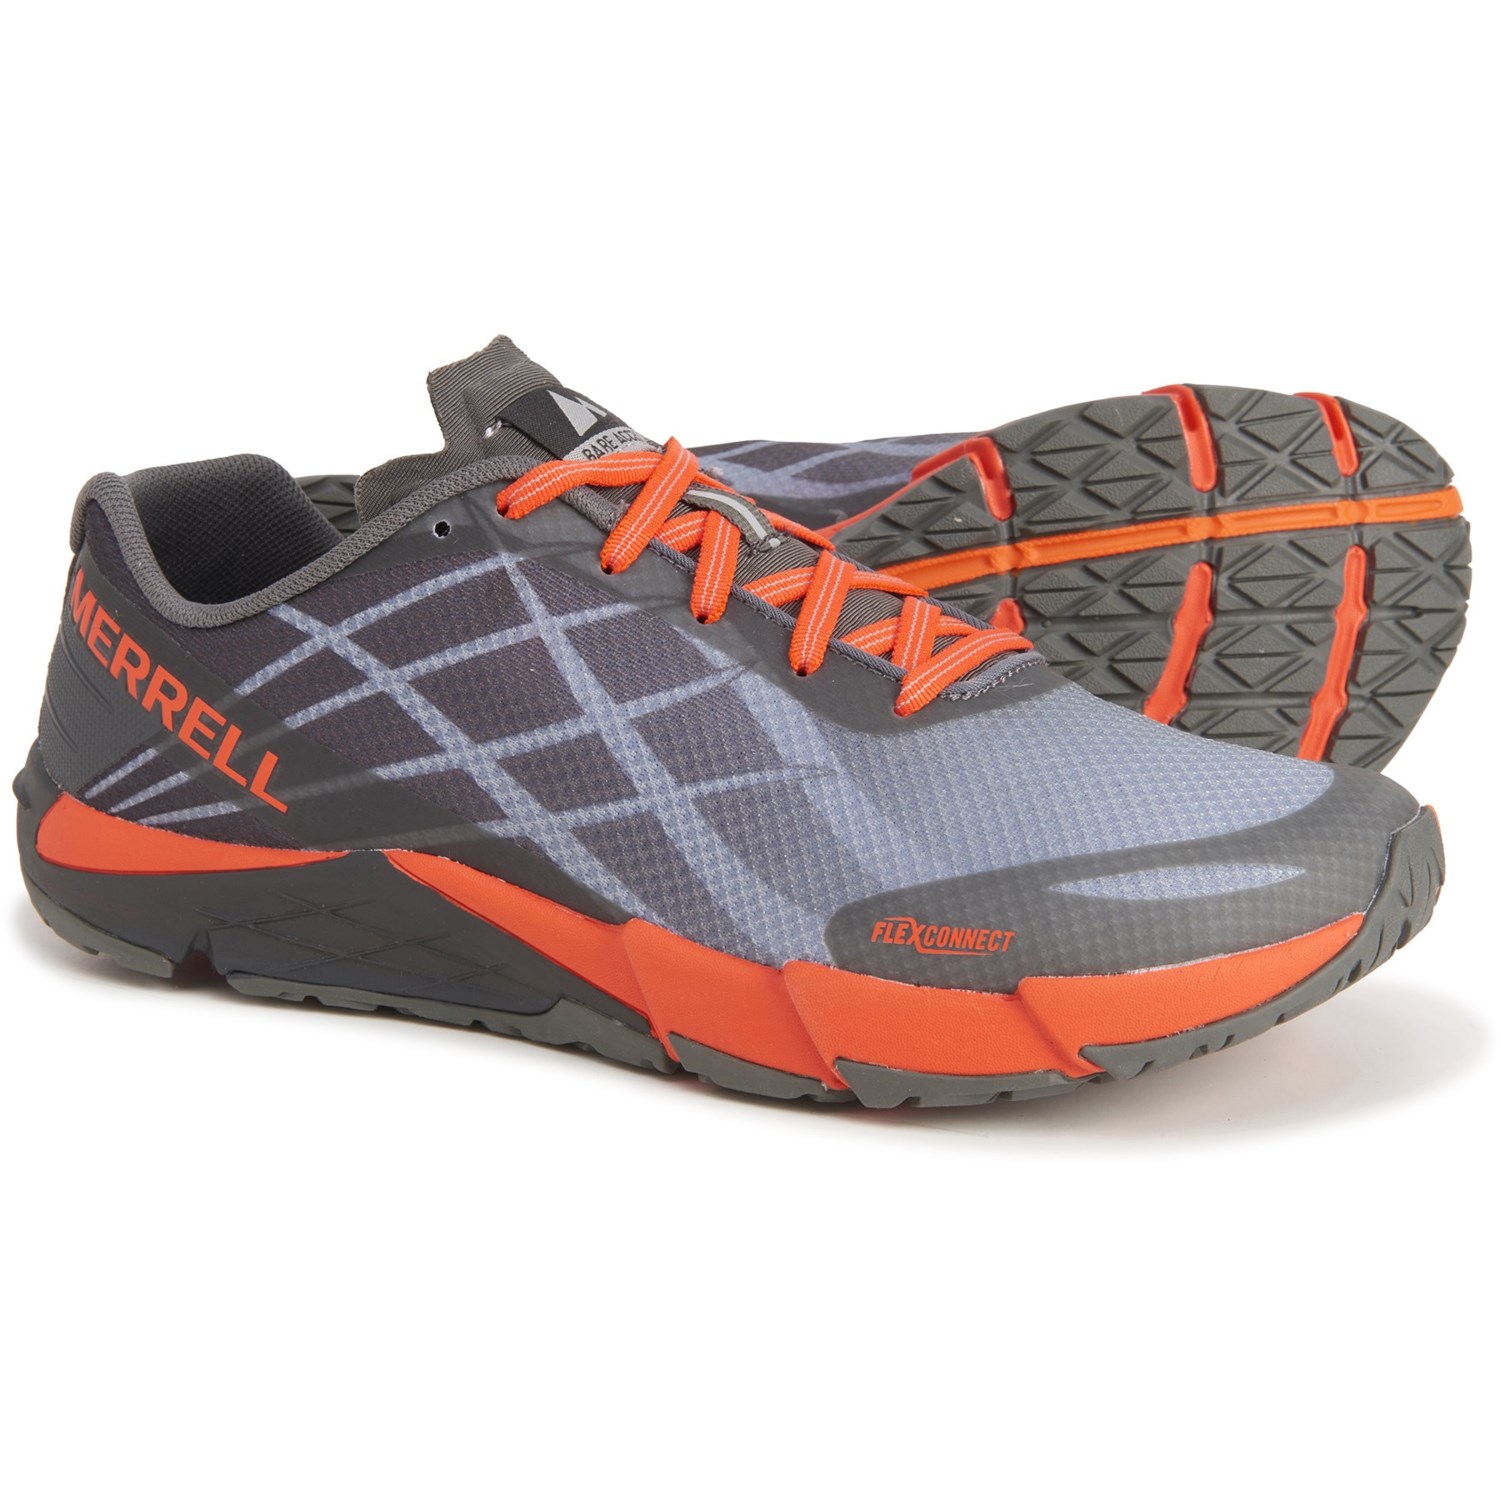 merrell bare access 5 trail running shoes